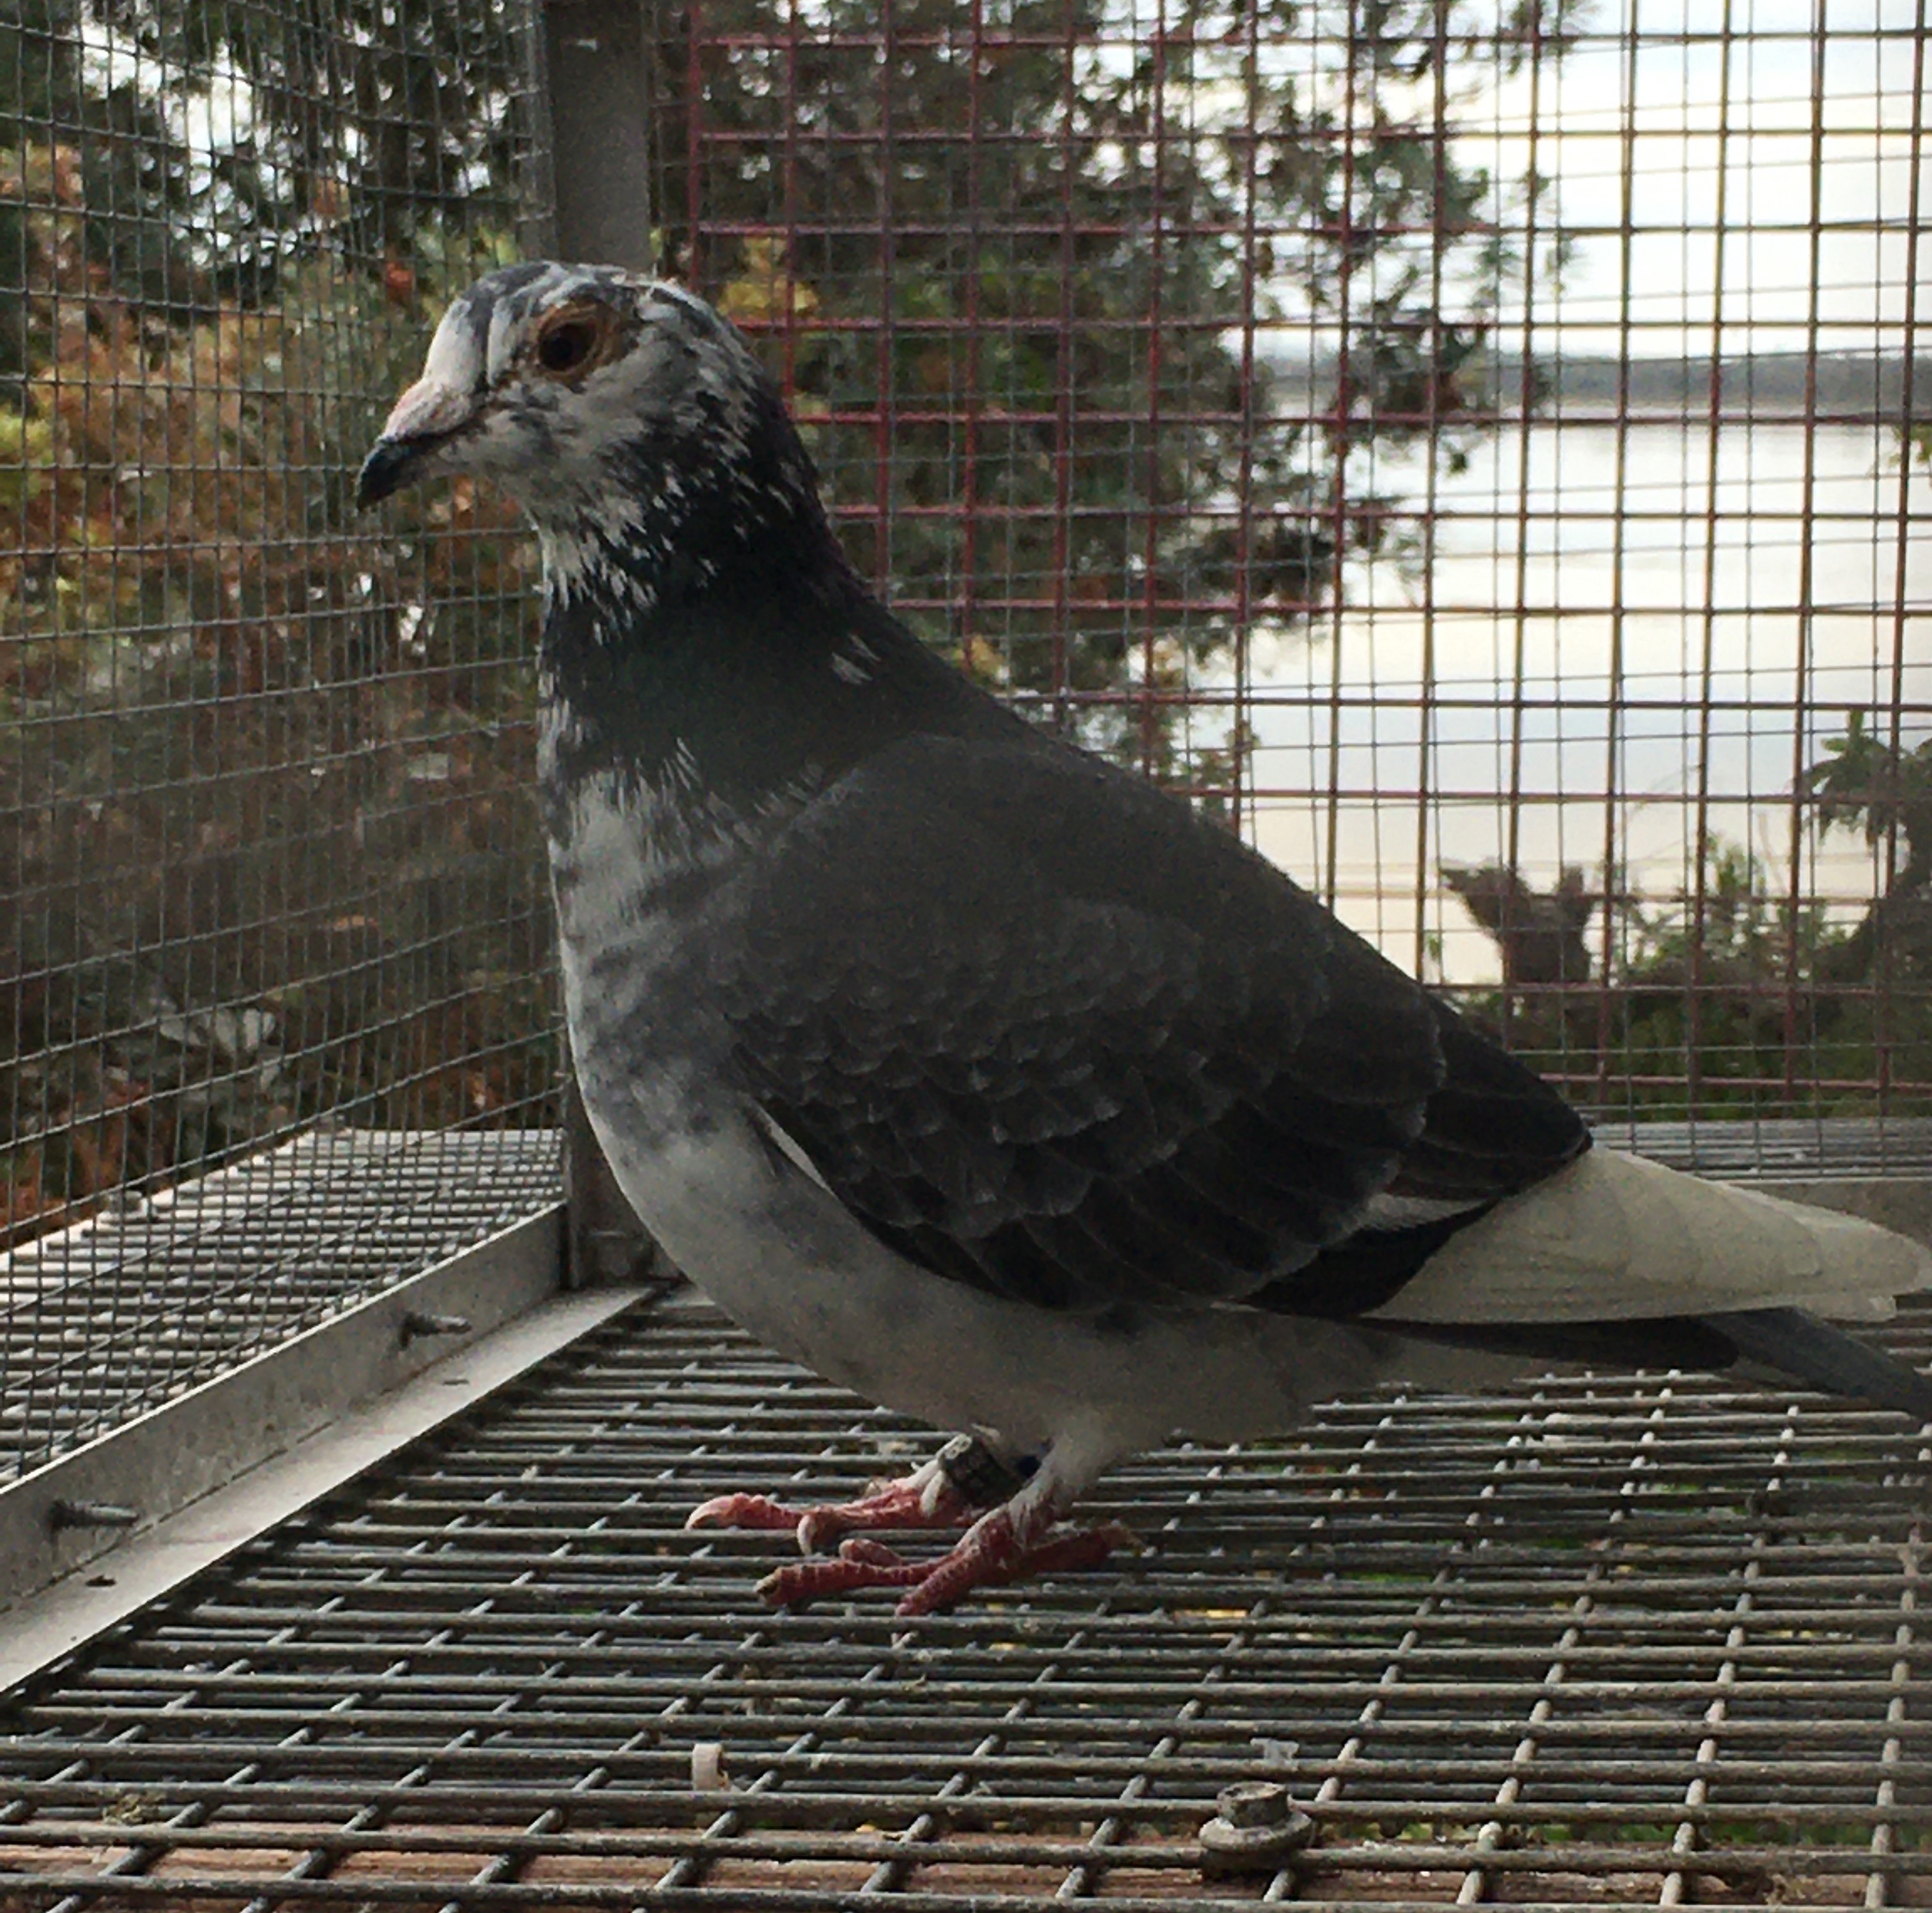 The humble homing pigeon is the fastest racing animal on earth